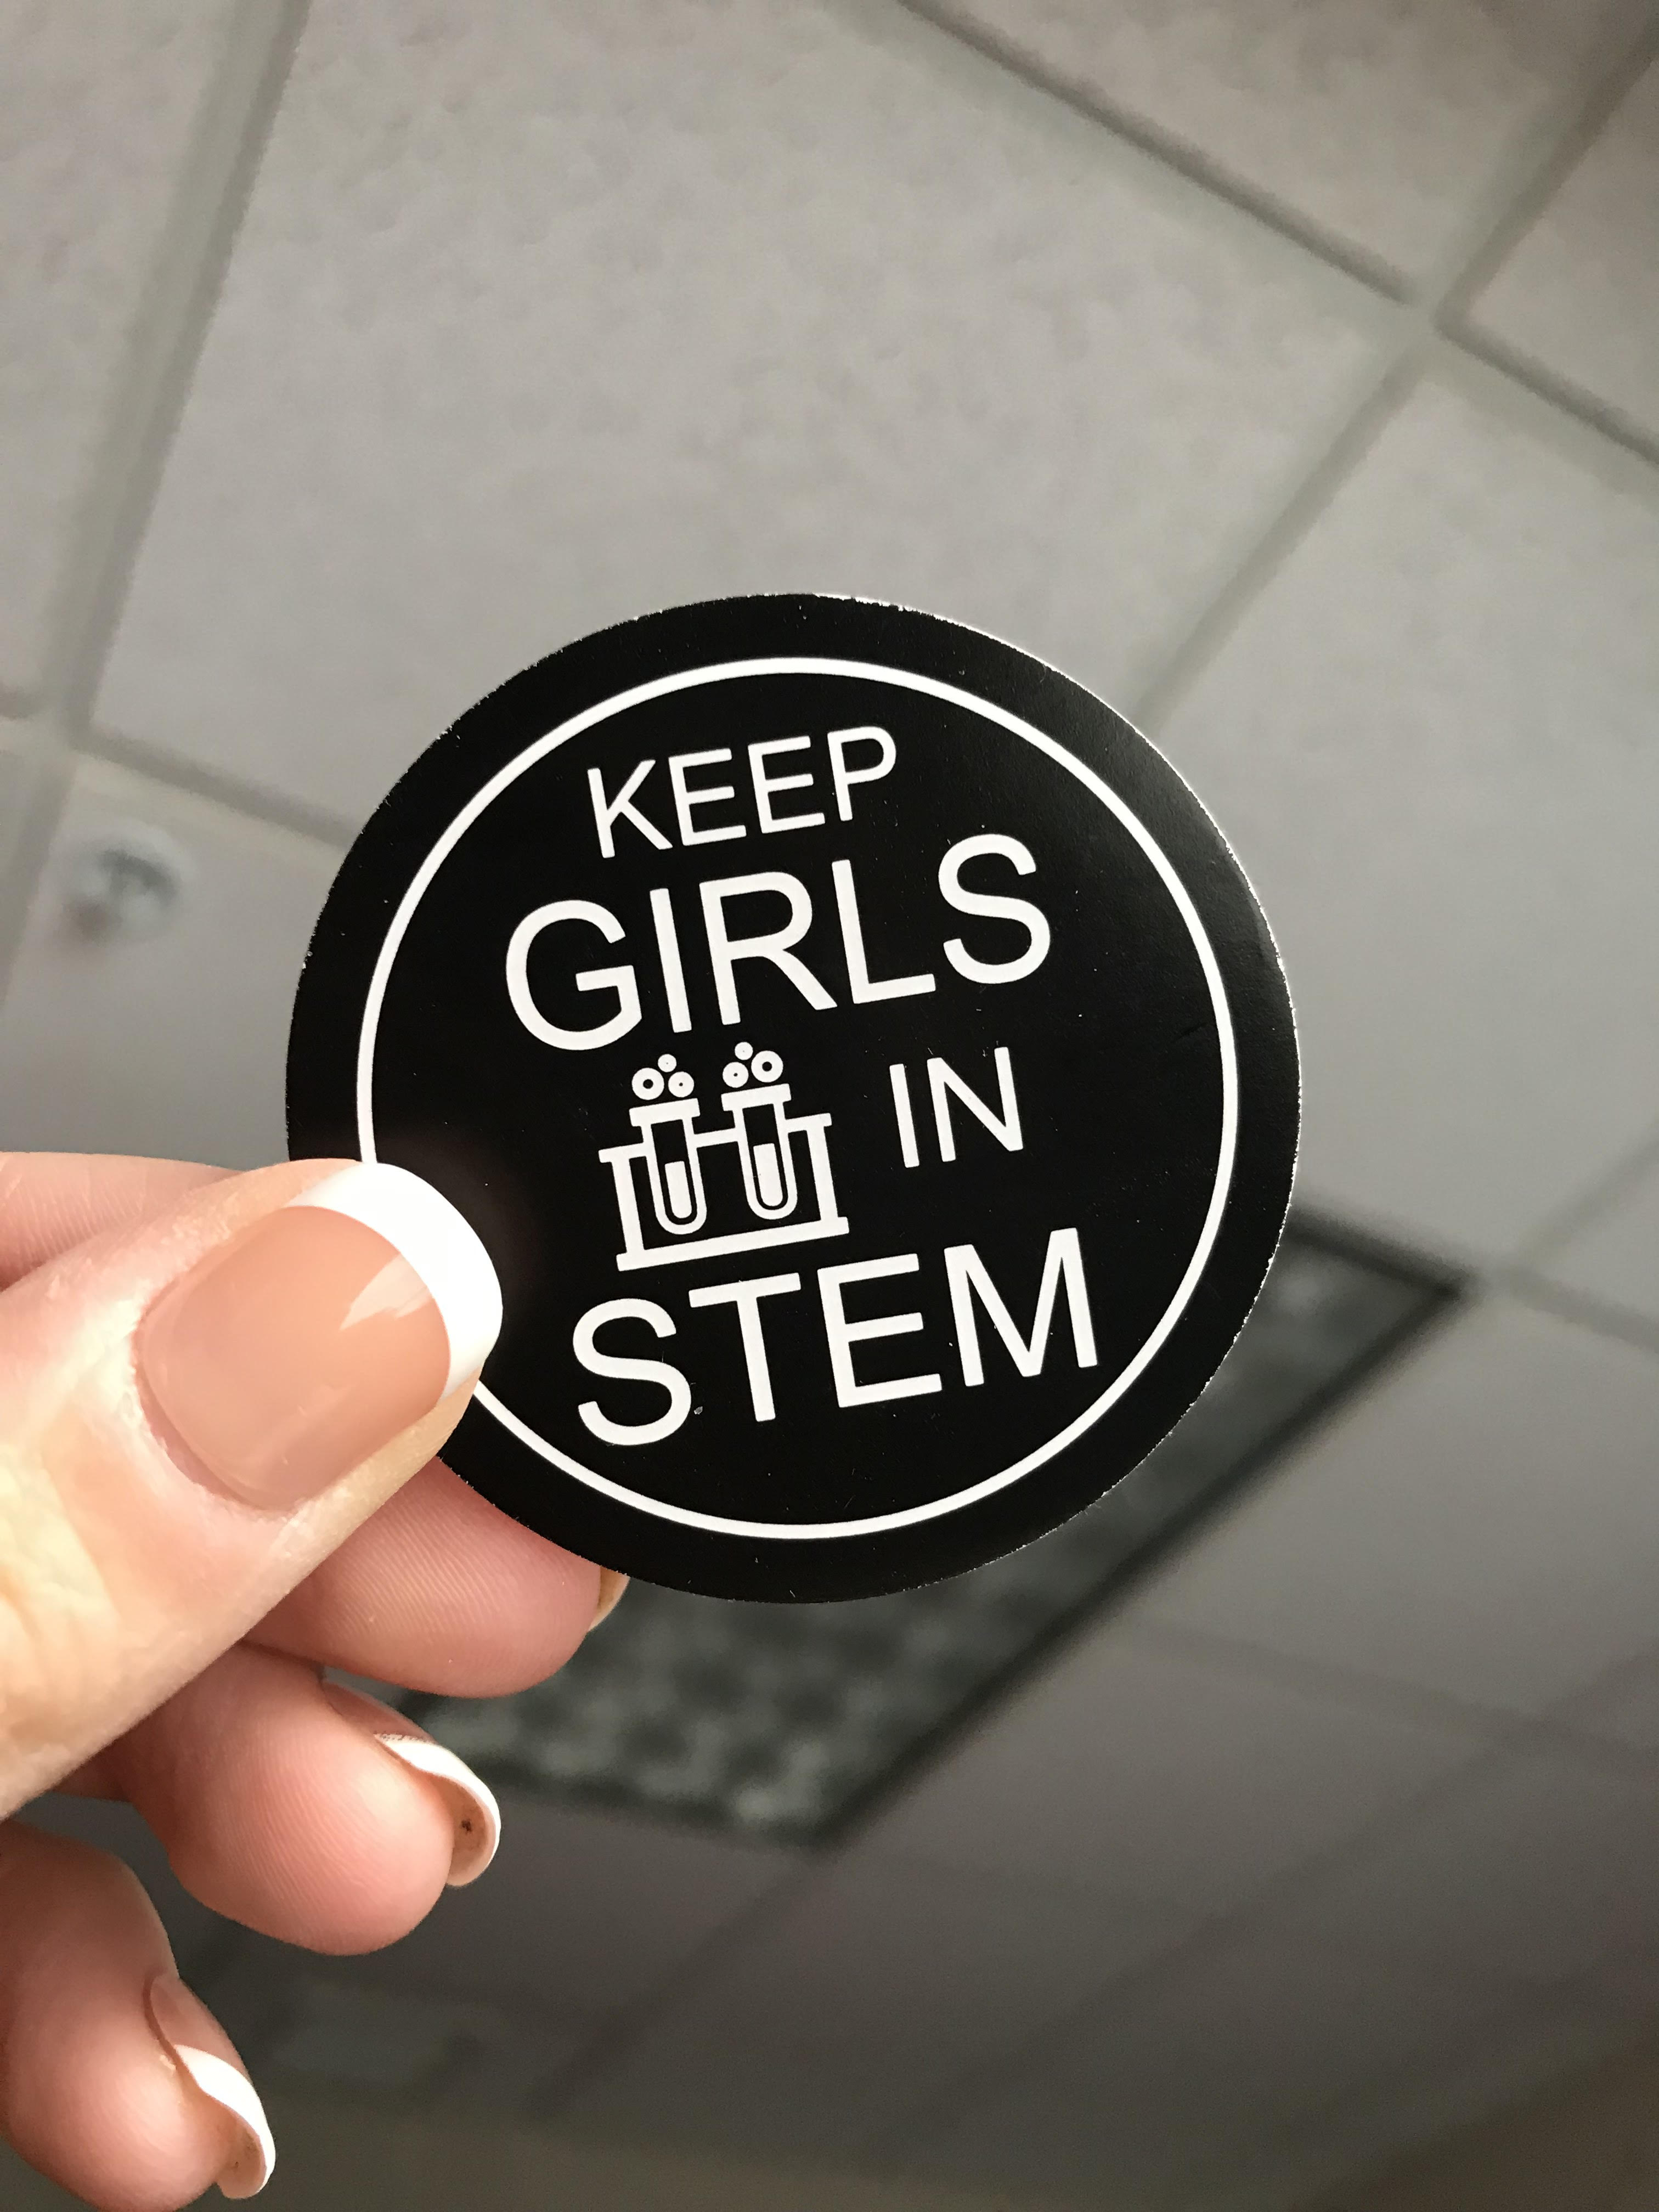 Keep Girls in STEM sticker to be handed out.